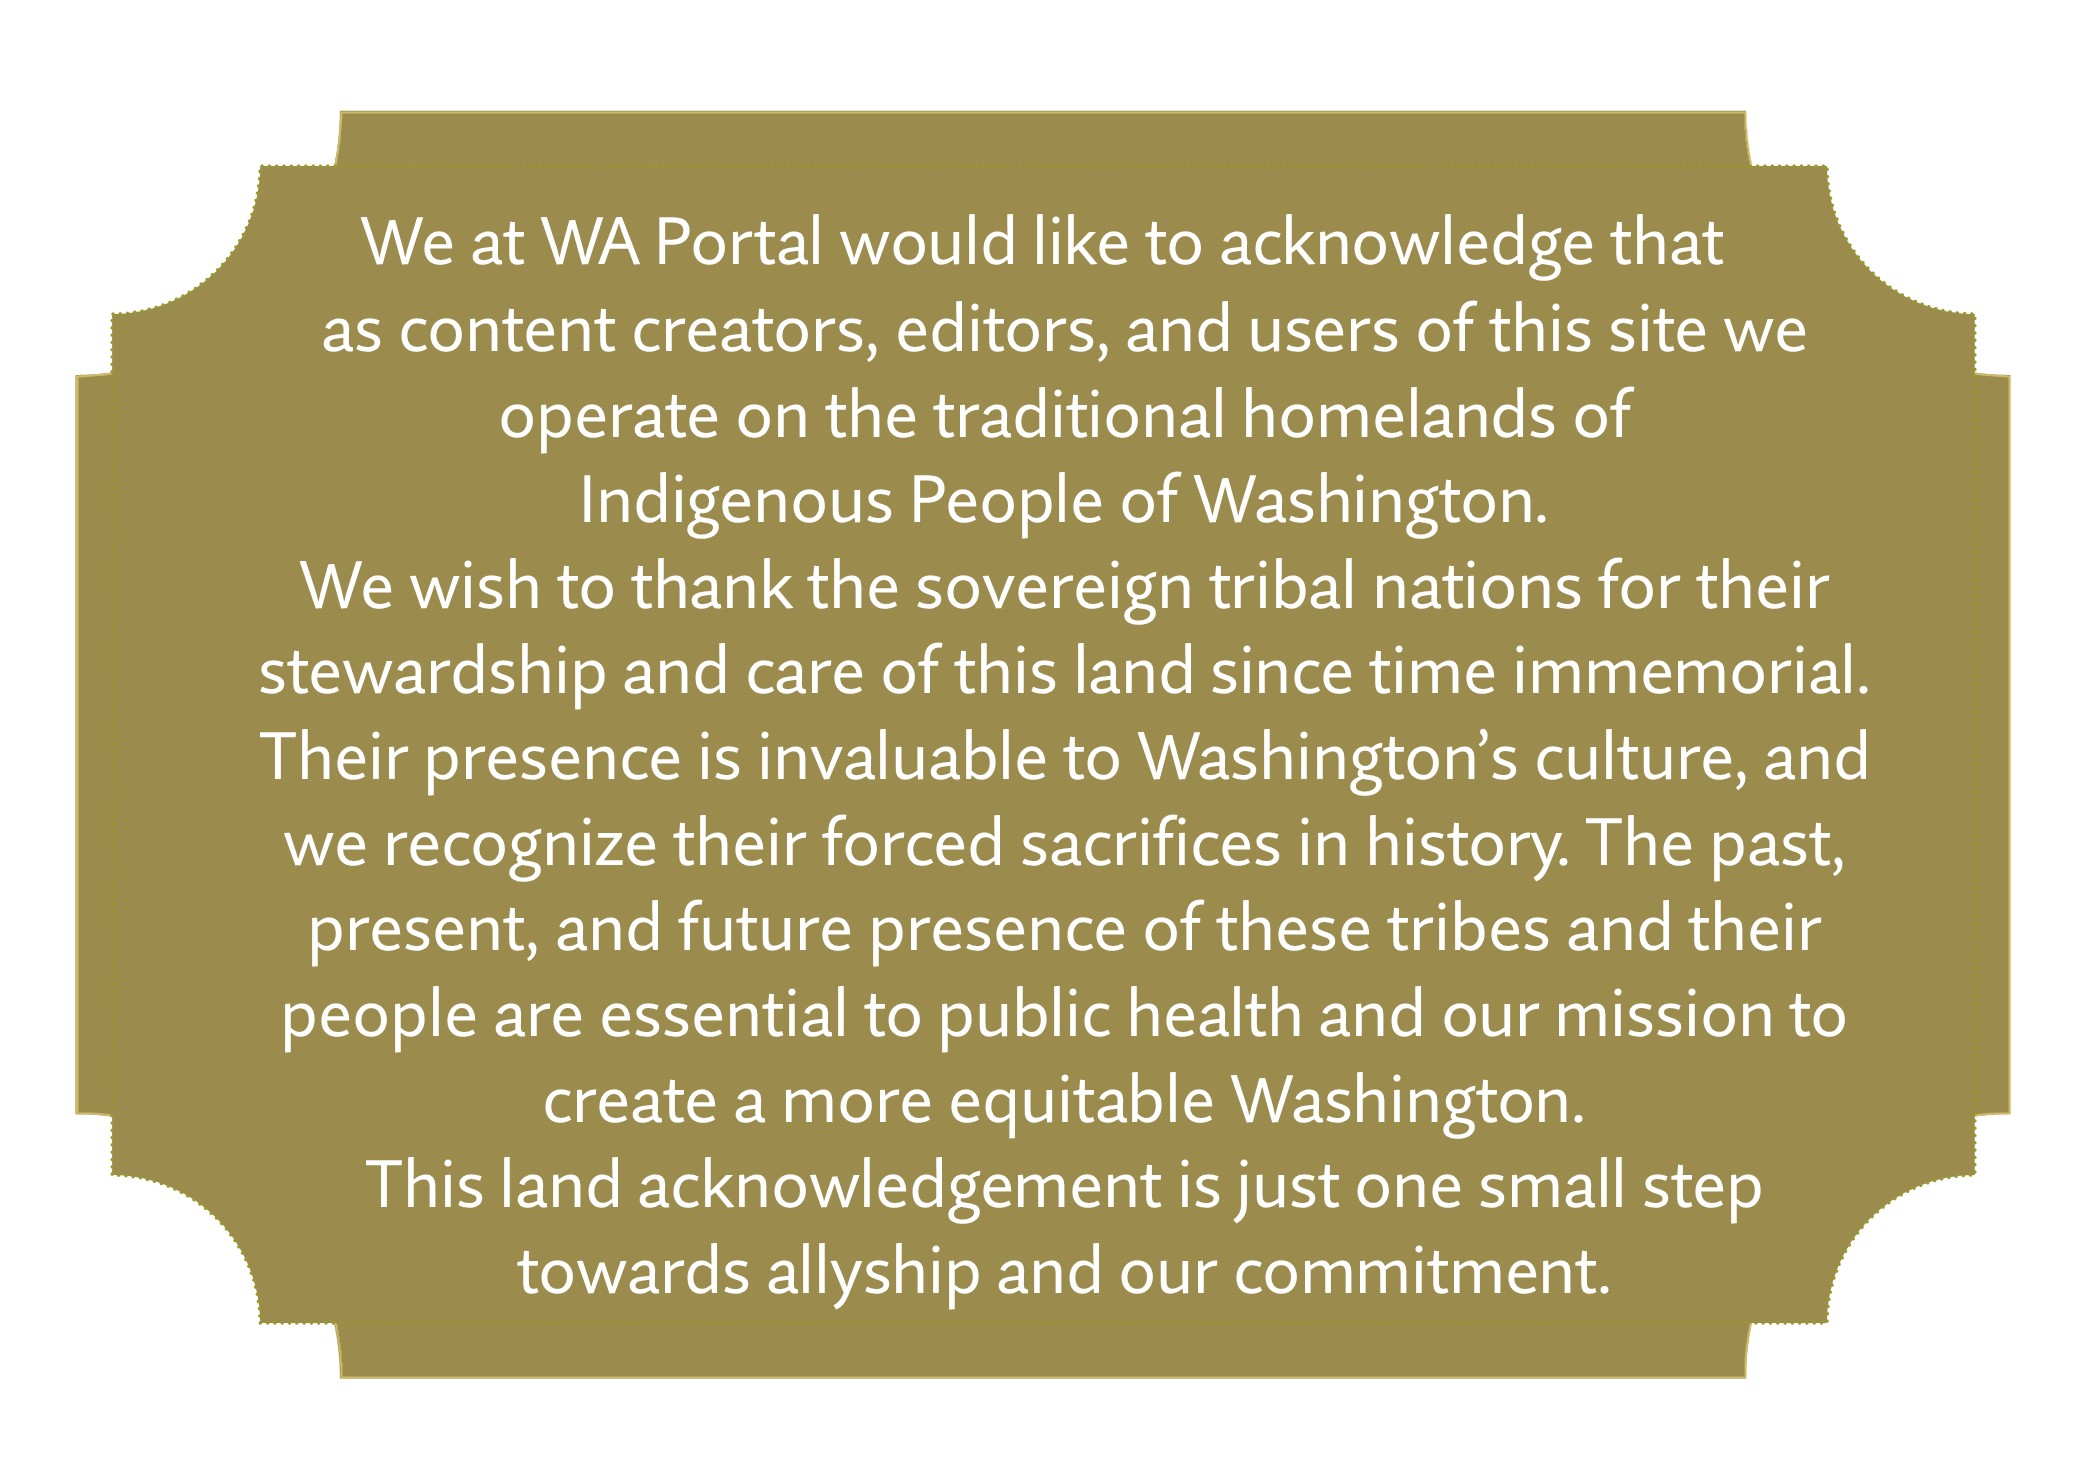 We at WA Portal would like to acknowledge that as content creators, editors, and users of this site we operate on the traditional homelands of  Indigenous People of Washington.  We wish to thank the sovereign tribal nations for their stewardship and care of this land since time immemorial. Their presence is invaluable to Washington’s culture, and we recognize their forced sacrifices in history. The past, present, and future presence of these tribes and their people are essential to public health and our mission to create a more equitable Washington.  This land acknowledgement is just one small step  towards allyship and our commitment.